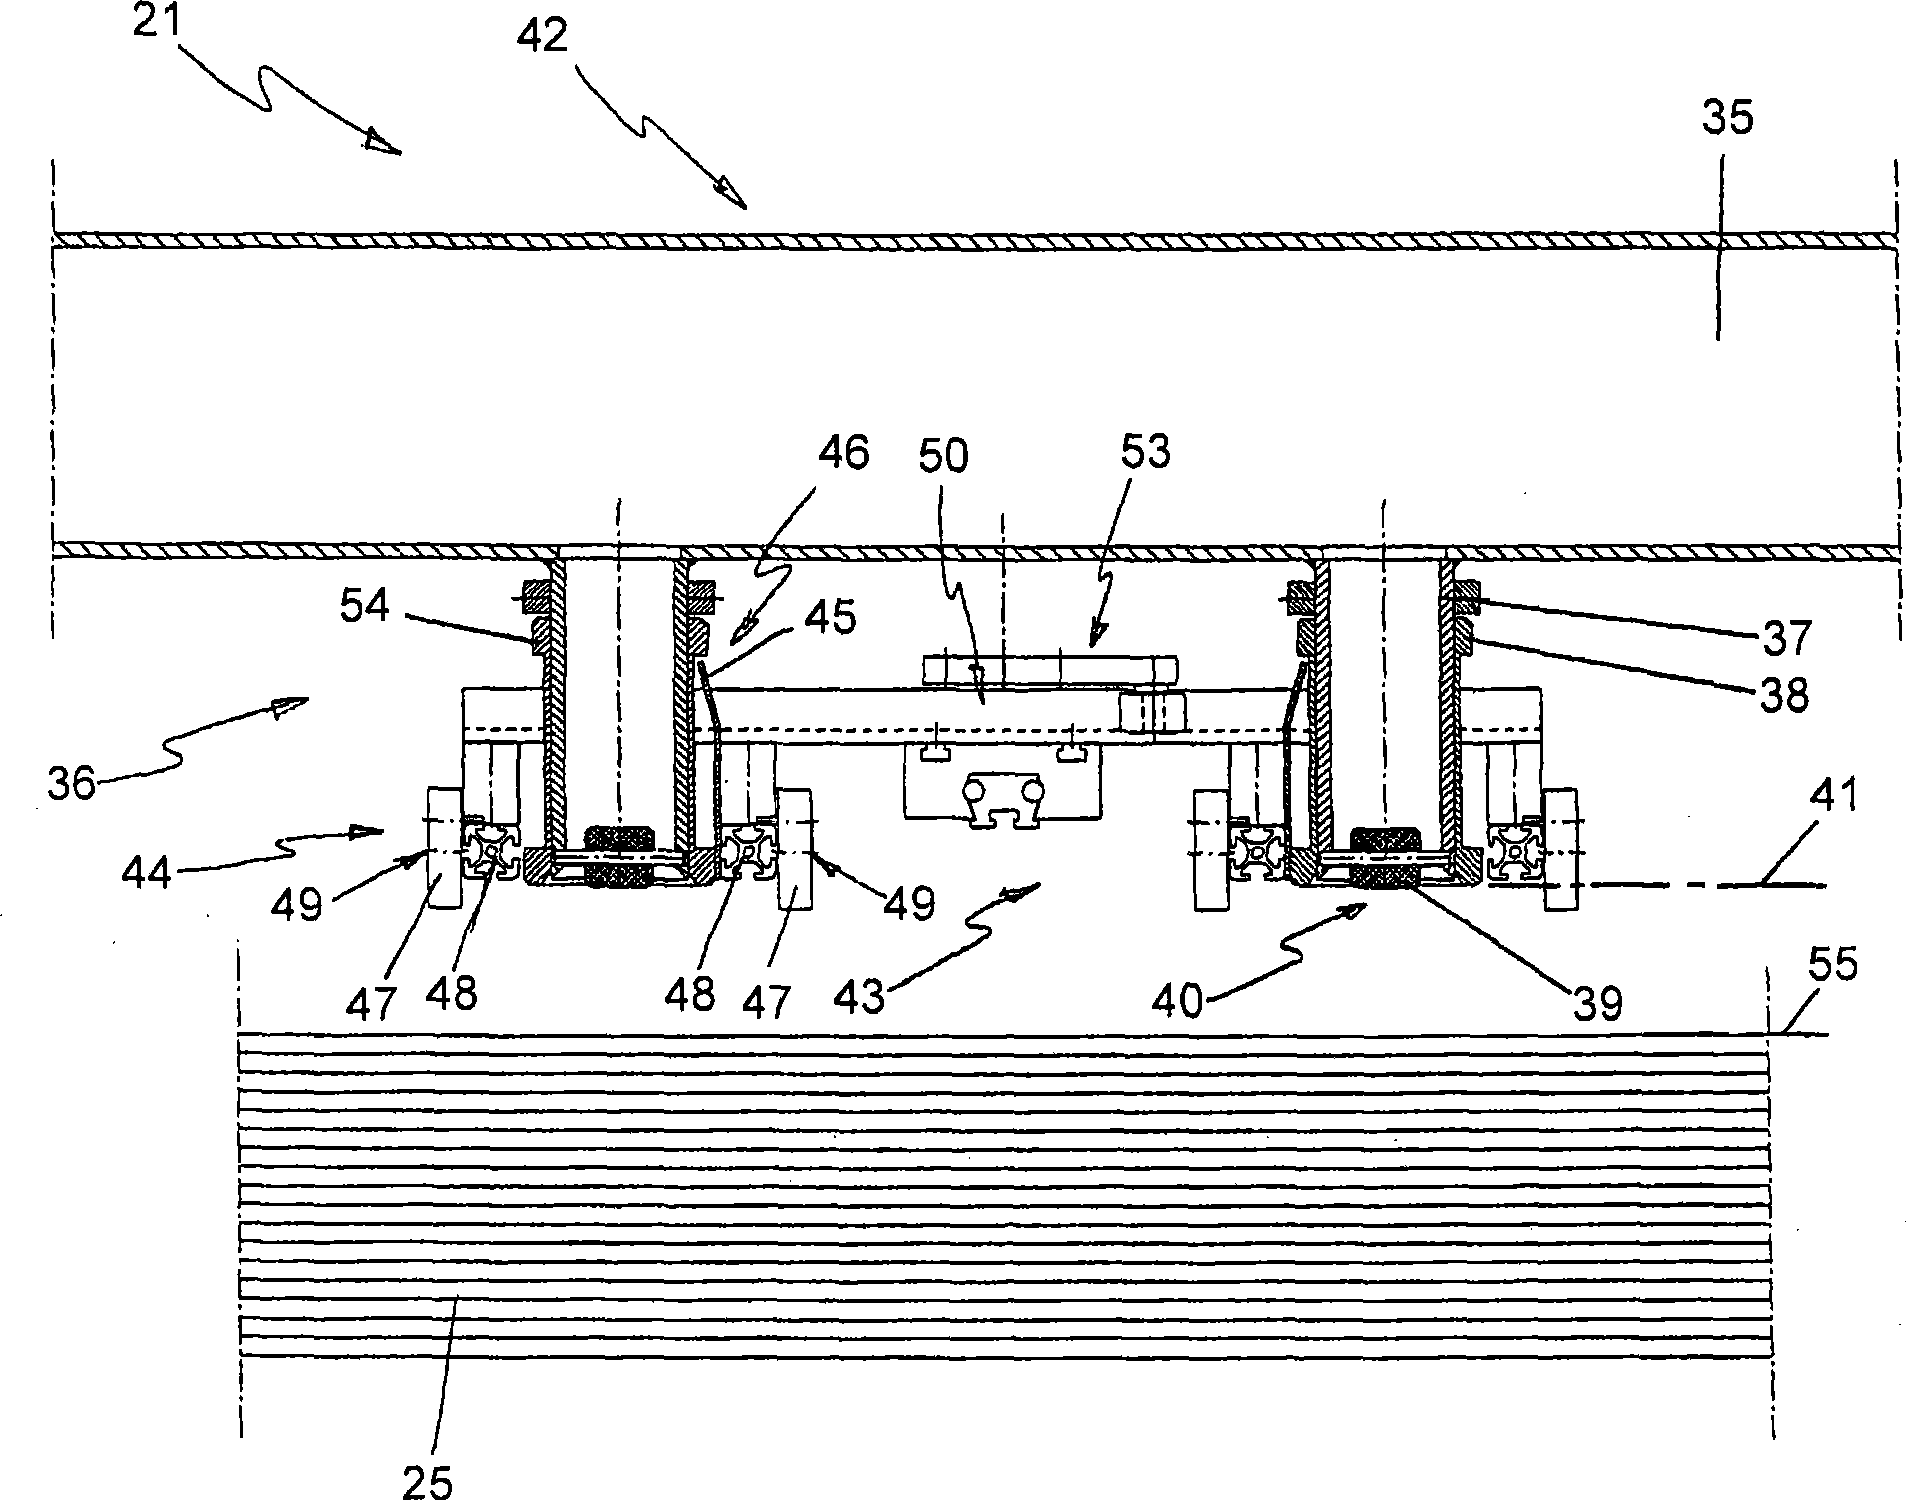 Handling apparatus and method for separating and feeding sheet blanks